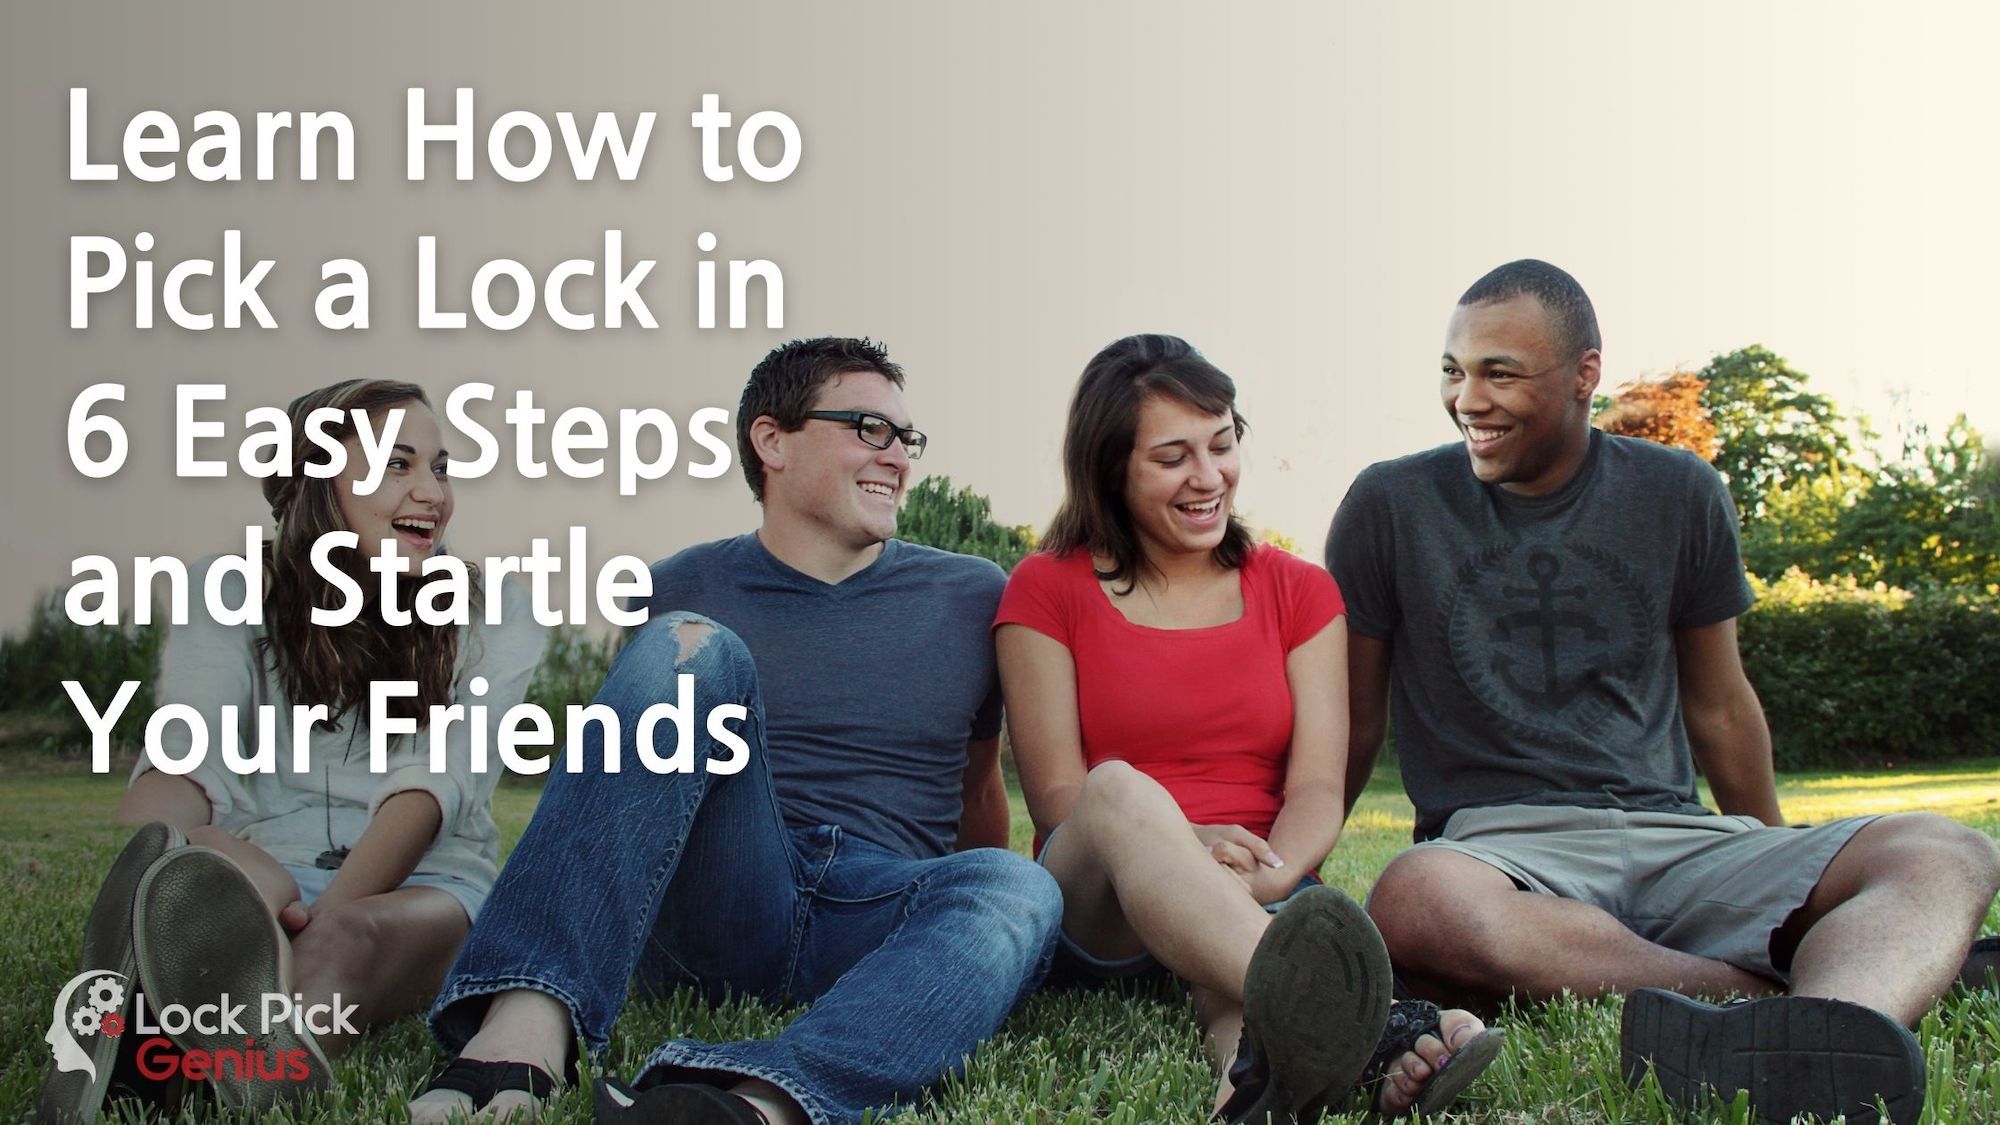 Learn How to Pick a Lock in 6 Easy Steps and Startle Your Friends